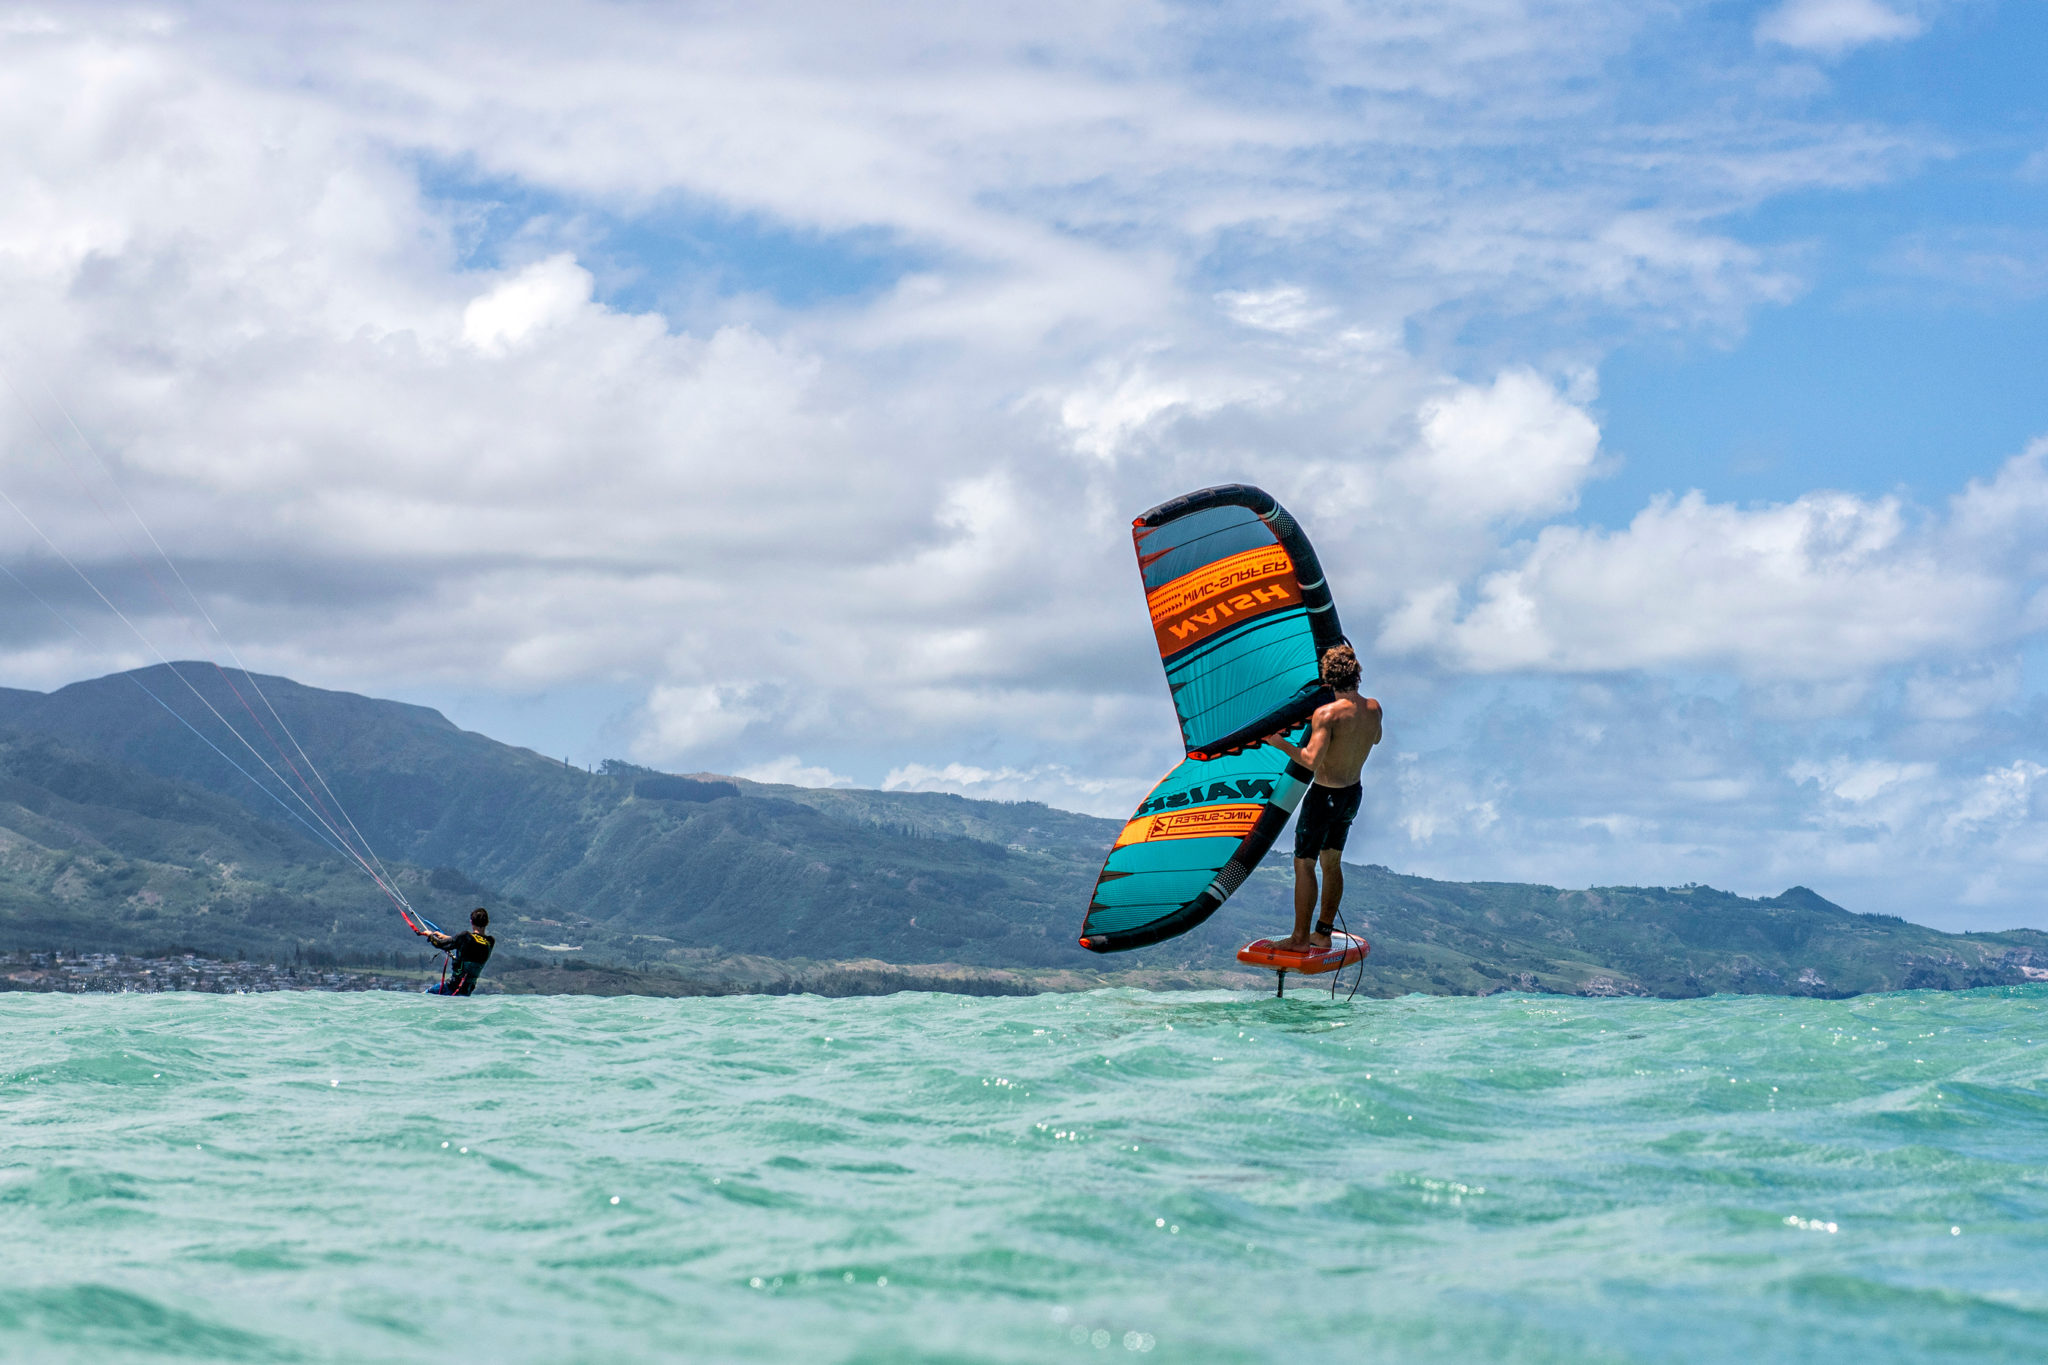 2020 Wingsurf Buyer's Guide: Naish Wing-Surfer - The Kiteboarder 